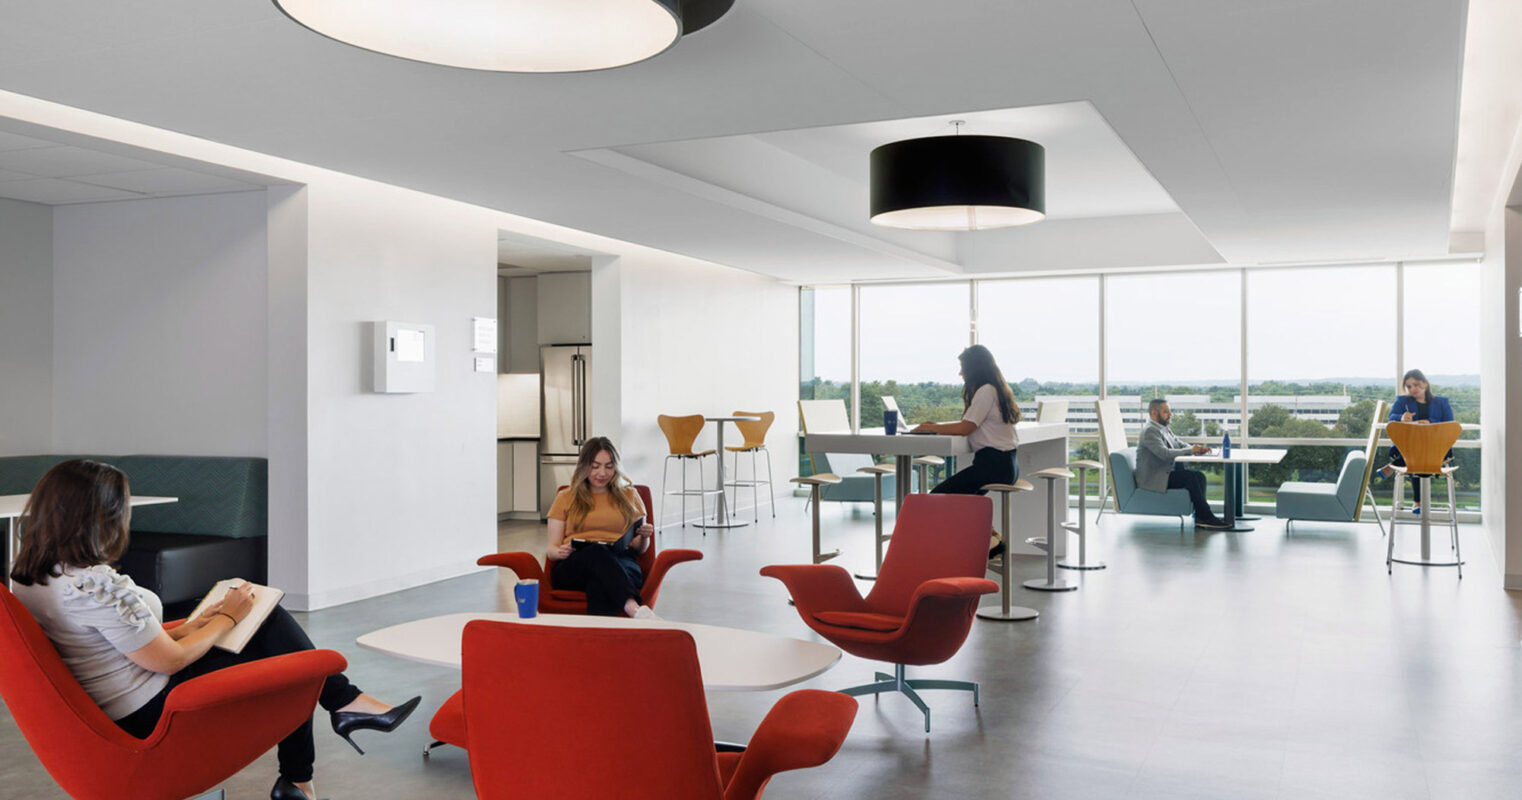 Open-plan office lounge with red armchairs centered around low coffee tables. The space is illuminated by oversized black pendant lighting and expansive windows providing abundant natural light. Neutral floors and walls emphasize the bold furniture color. Individuals are seated variously, engaging in work and conversation.